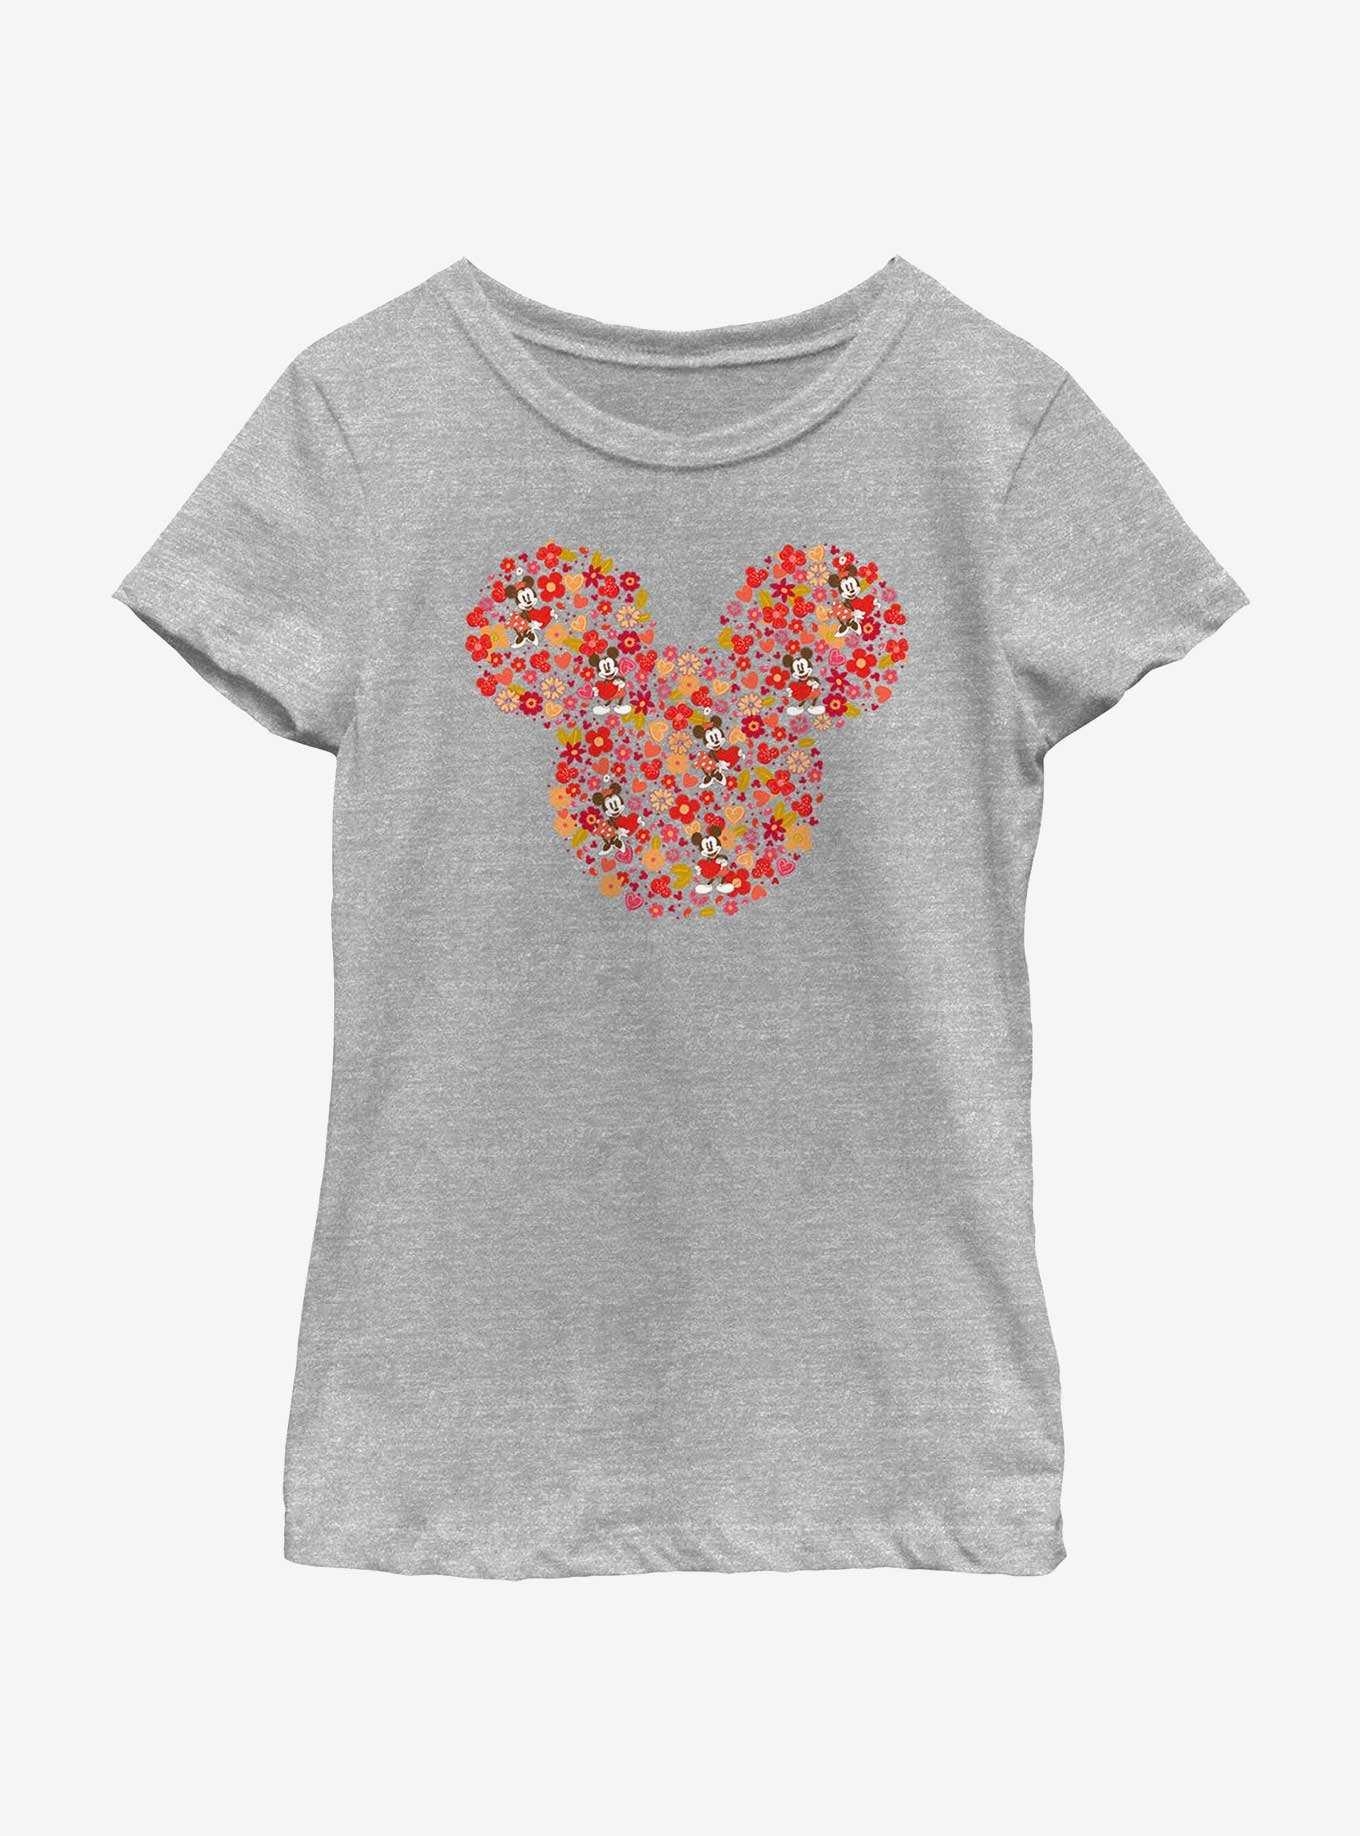 Disney Mickey Mouse Mickey Flowers Youth Girls T-Shirt, , hi-res